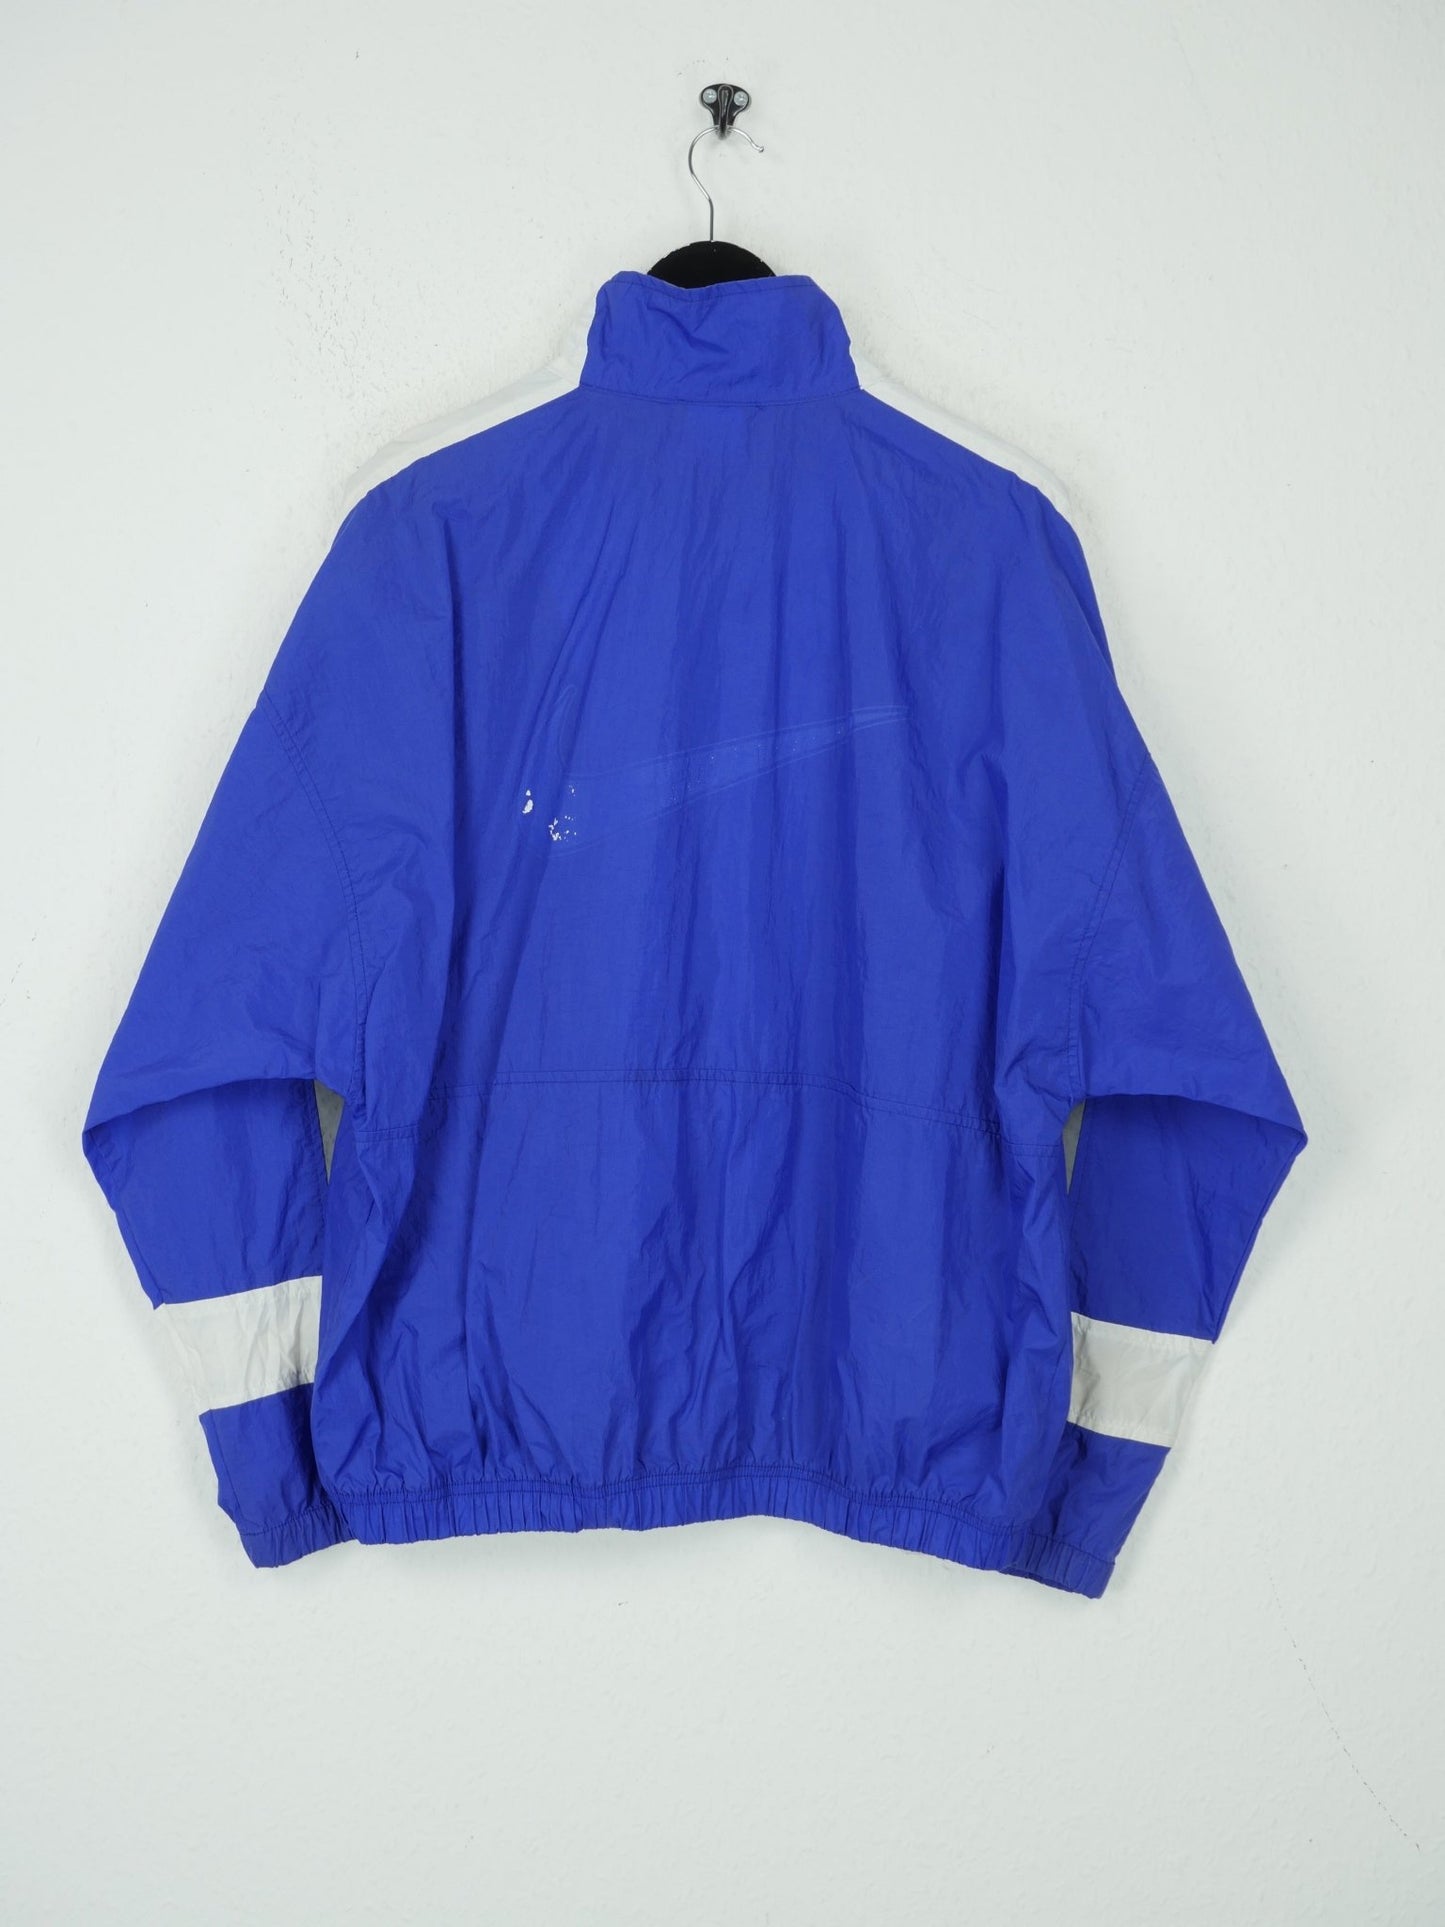 Nike Red Tag embroidered Swoosh blue Track Jacket - Peeces